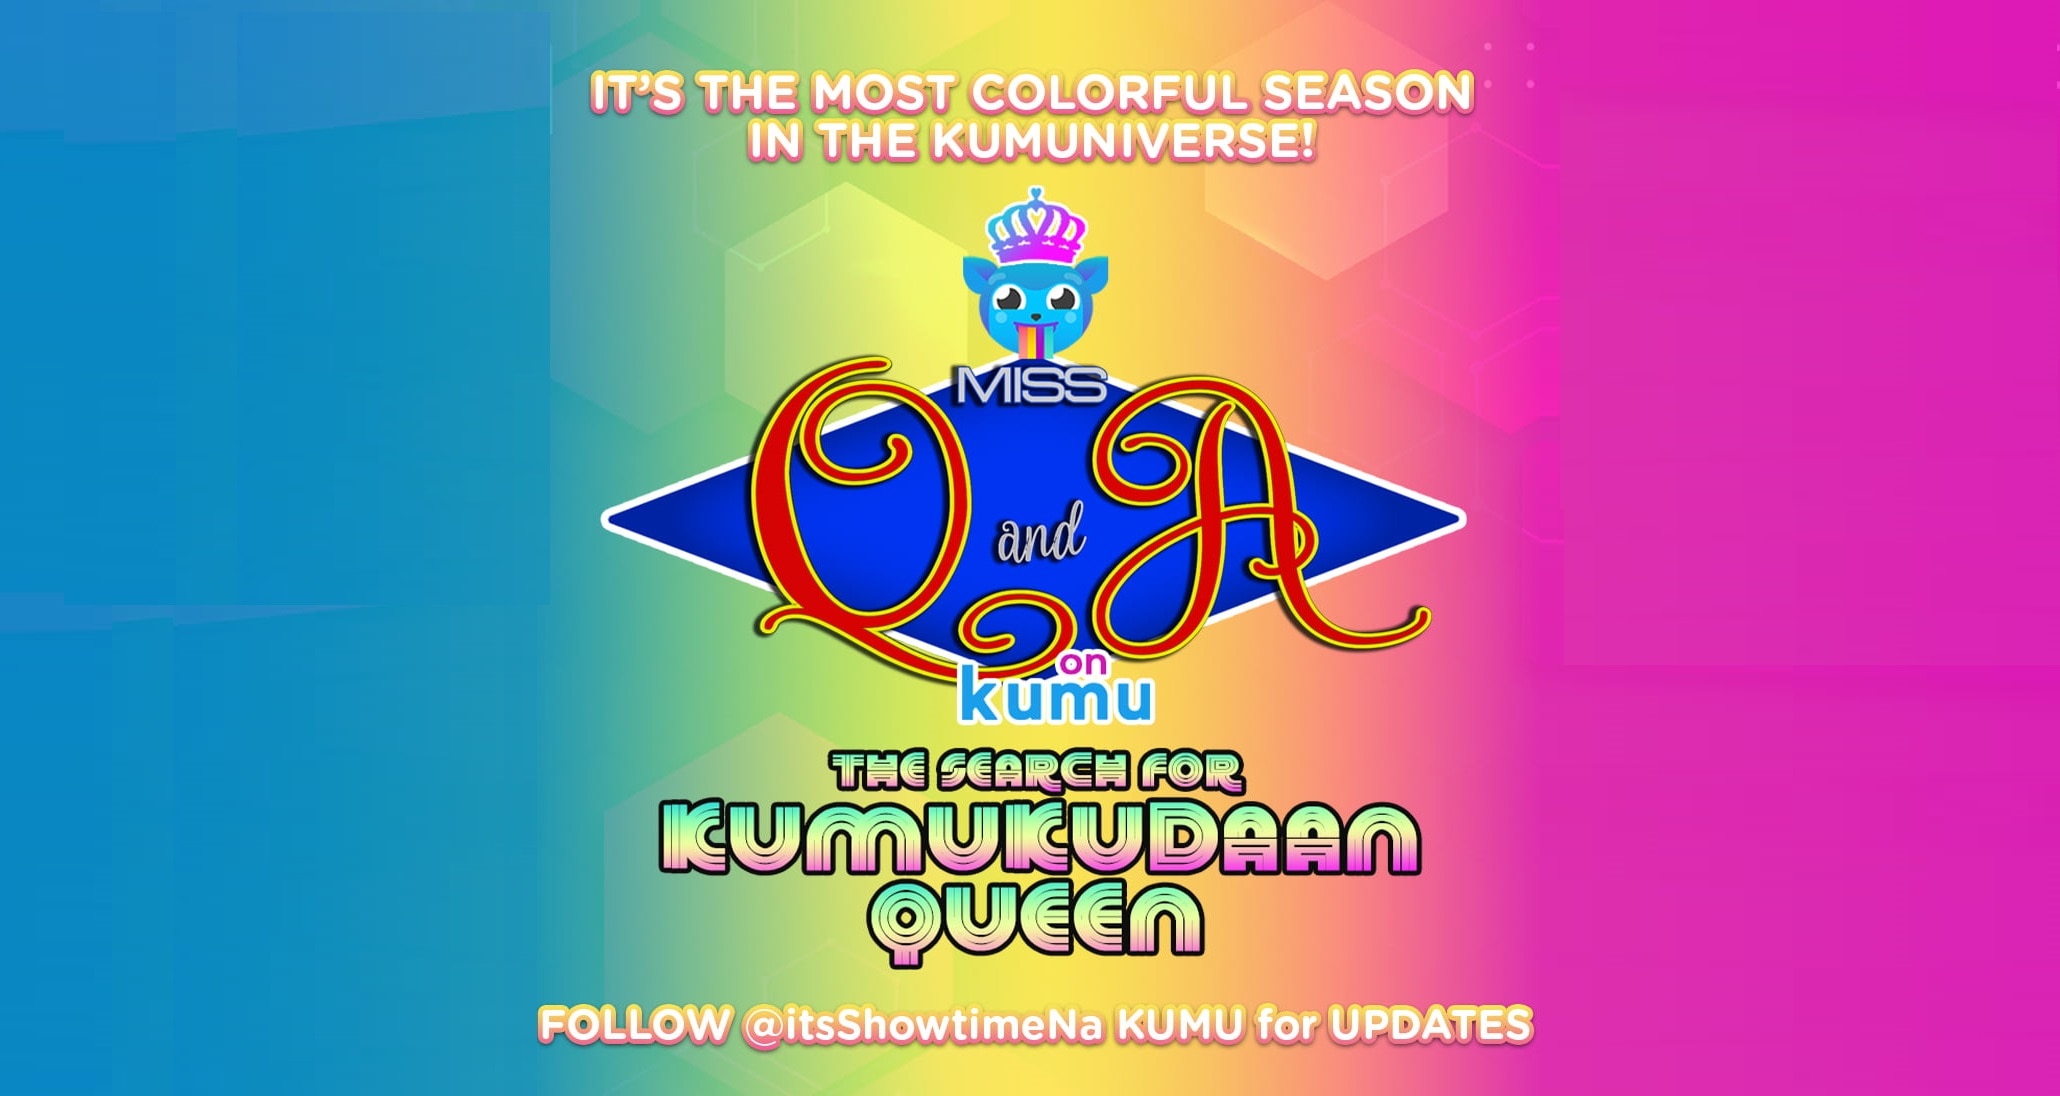 “It's Showtime's" iconic “Miss Q & A” pageant returns to Kumu